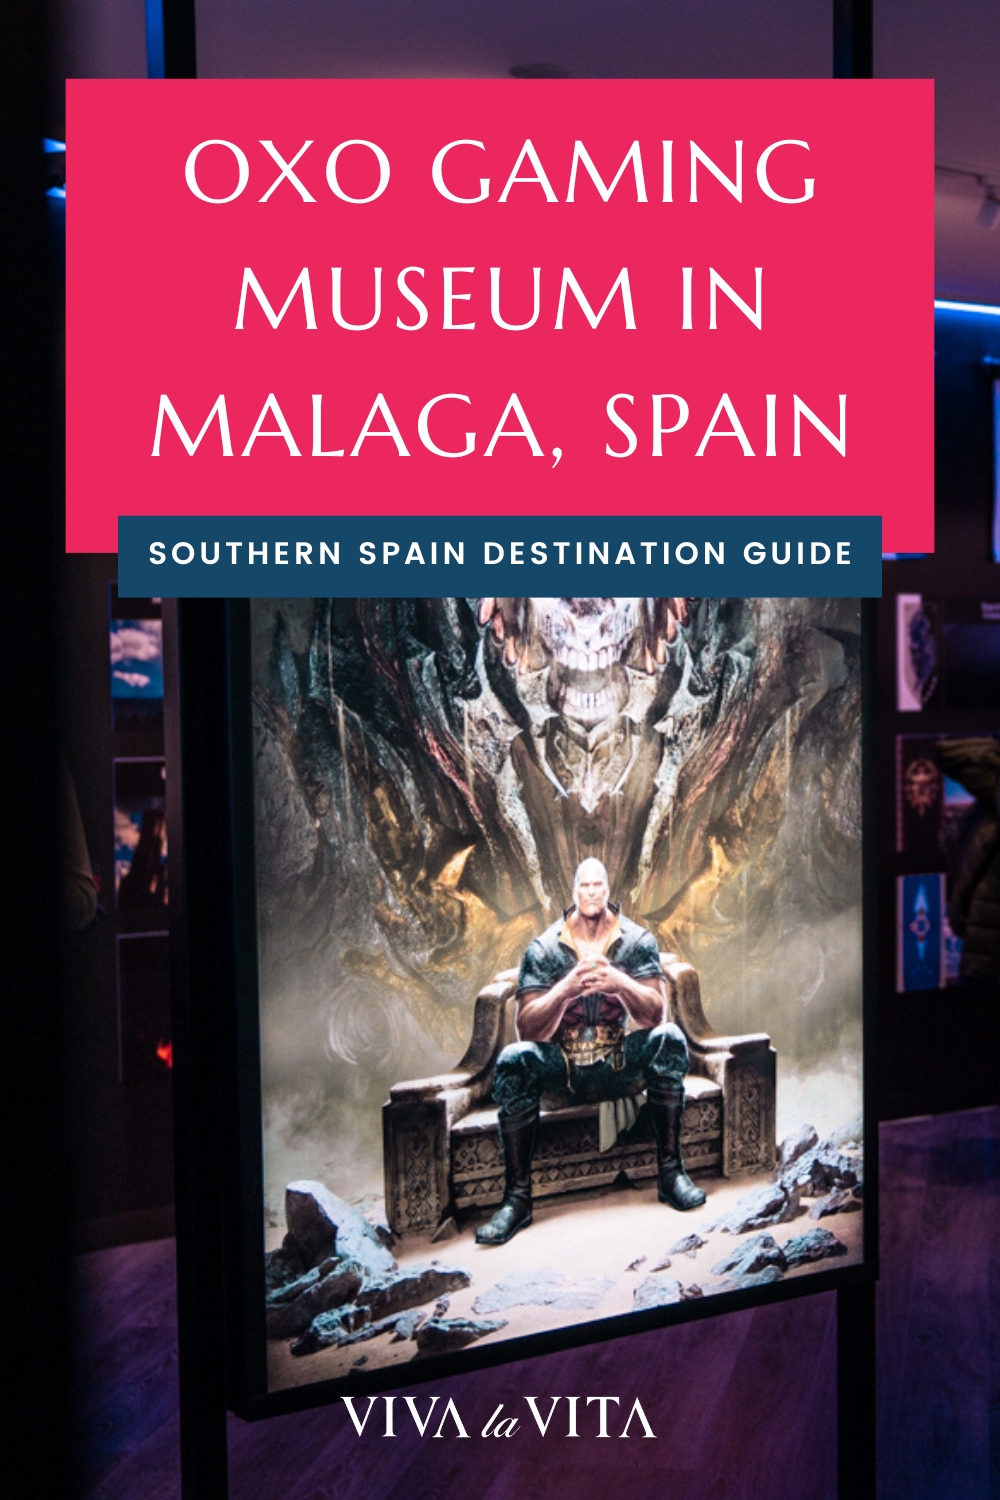 pinterest image showing the interiors and games on display in the oxo museum in malaga, southern spain with a headline - oxo gaming museum in Malaga, Spain